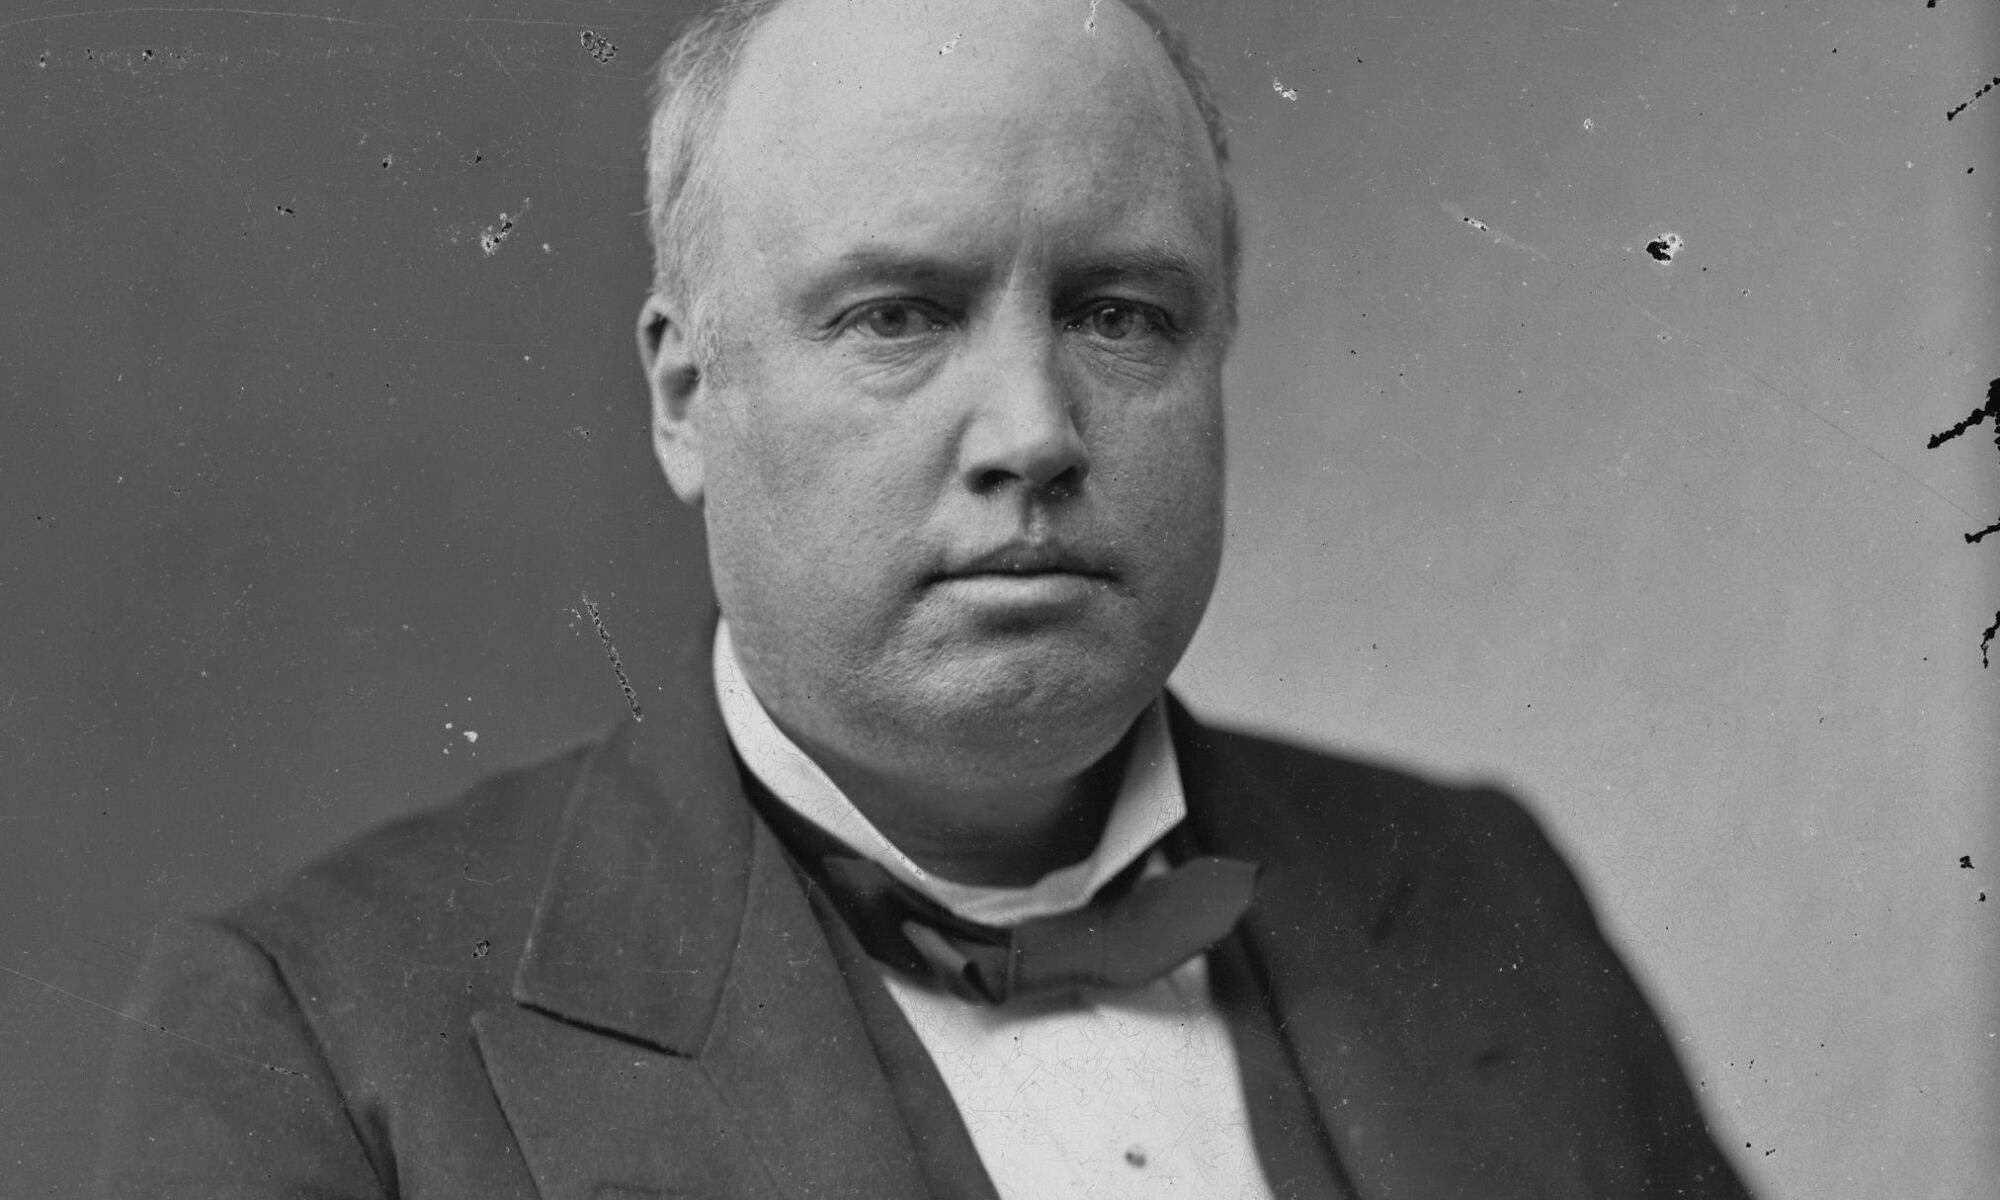 Black and White photo of Robert Green Ingersoll (August 11, 1833 – July 21, 1899)